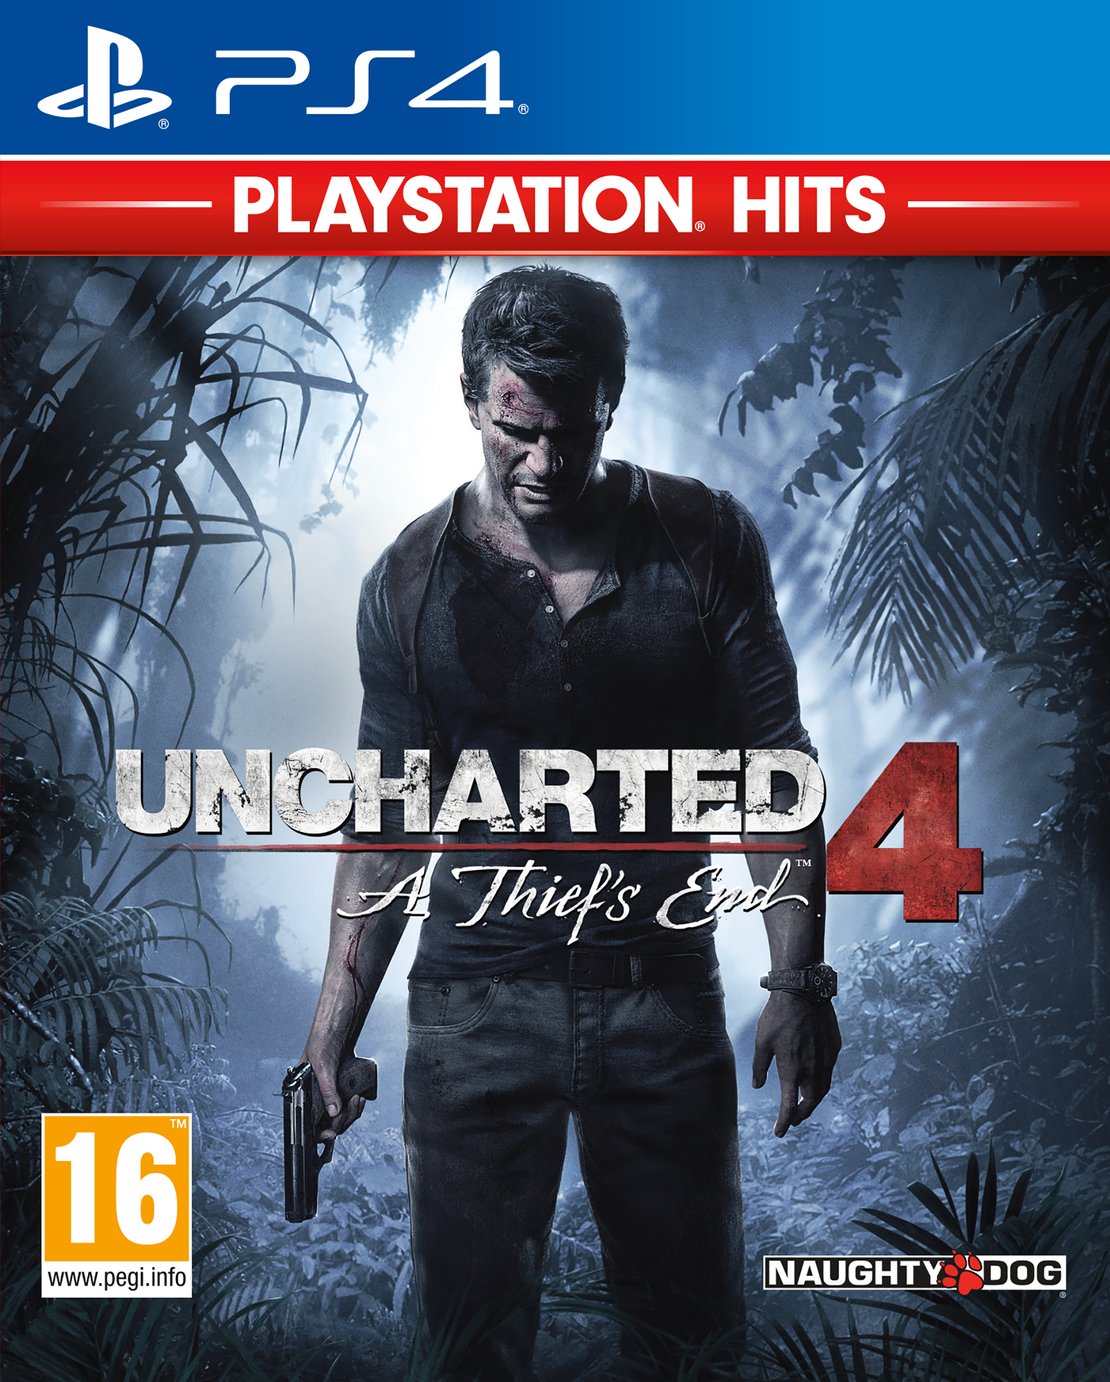 Uncharted 4: A Thief's End PS4 Hits Game